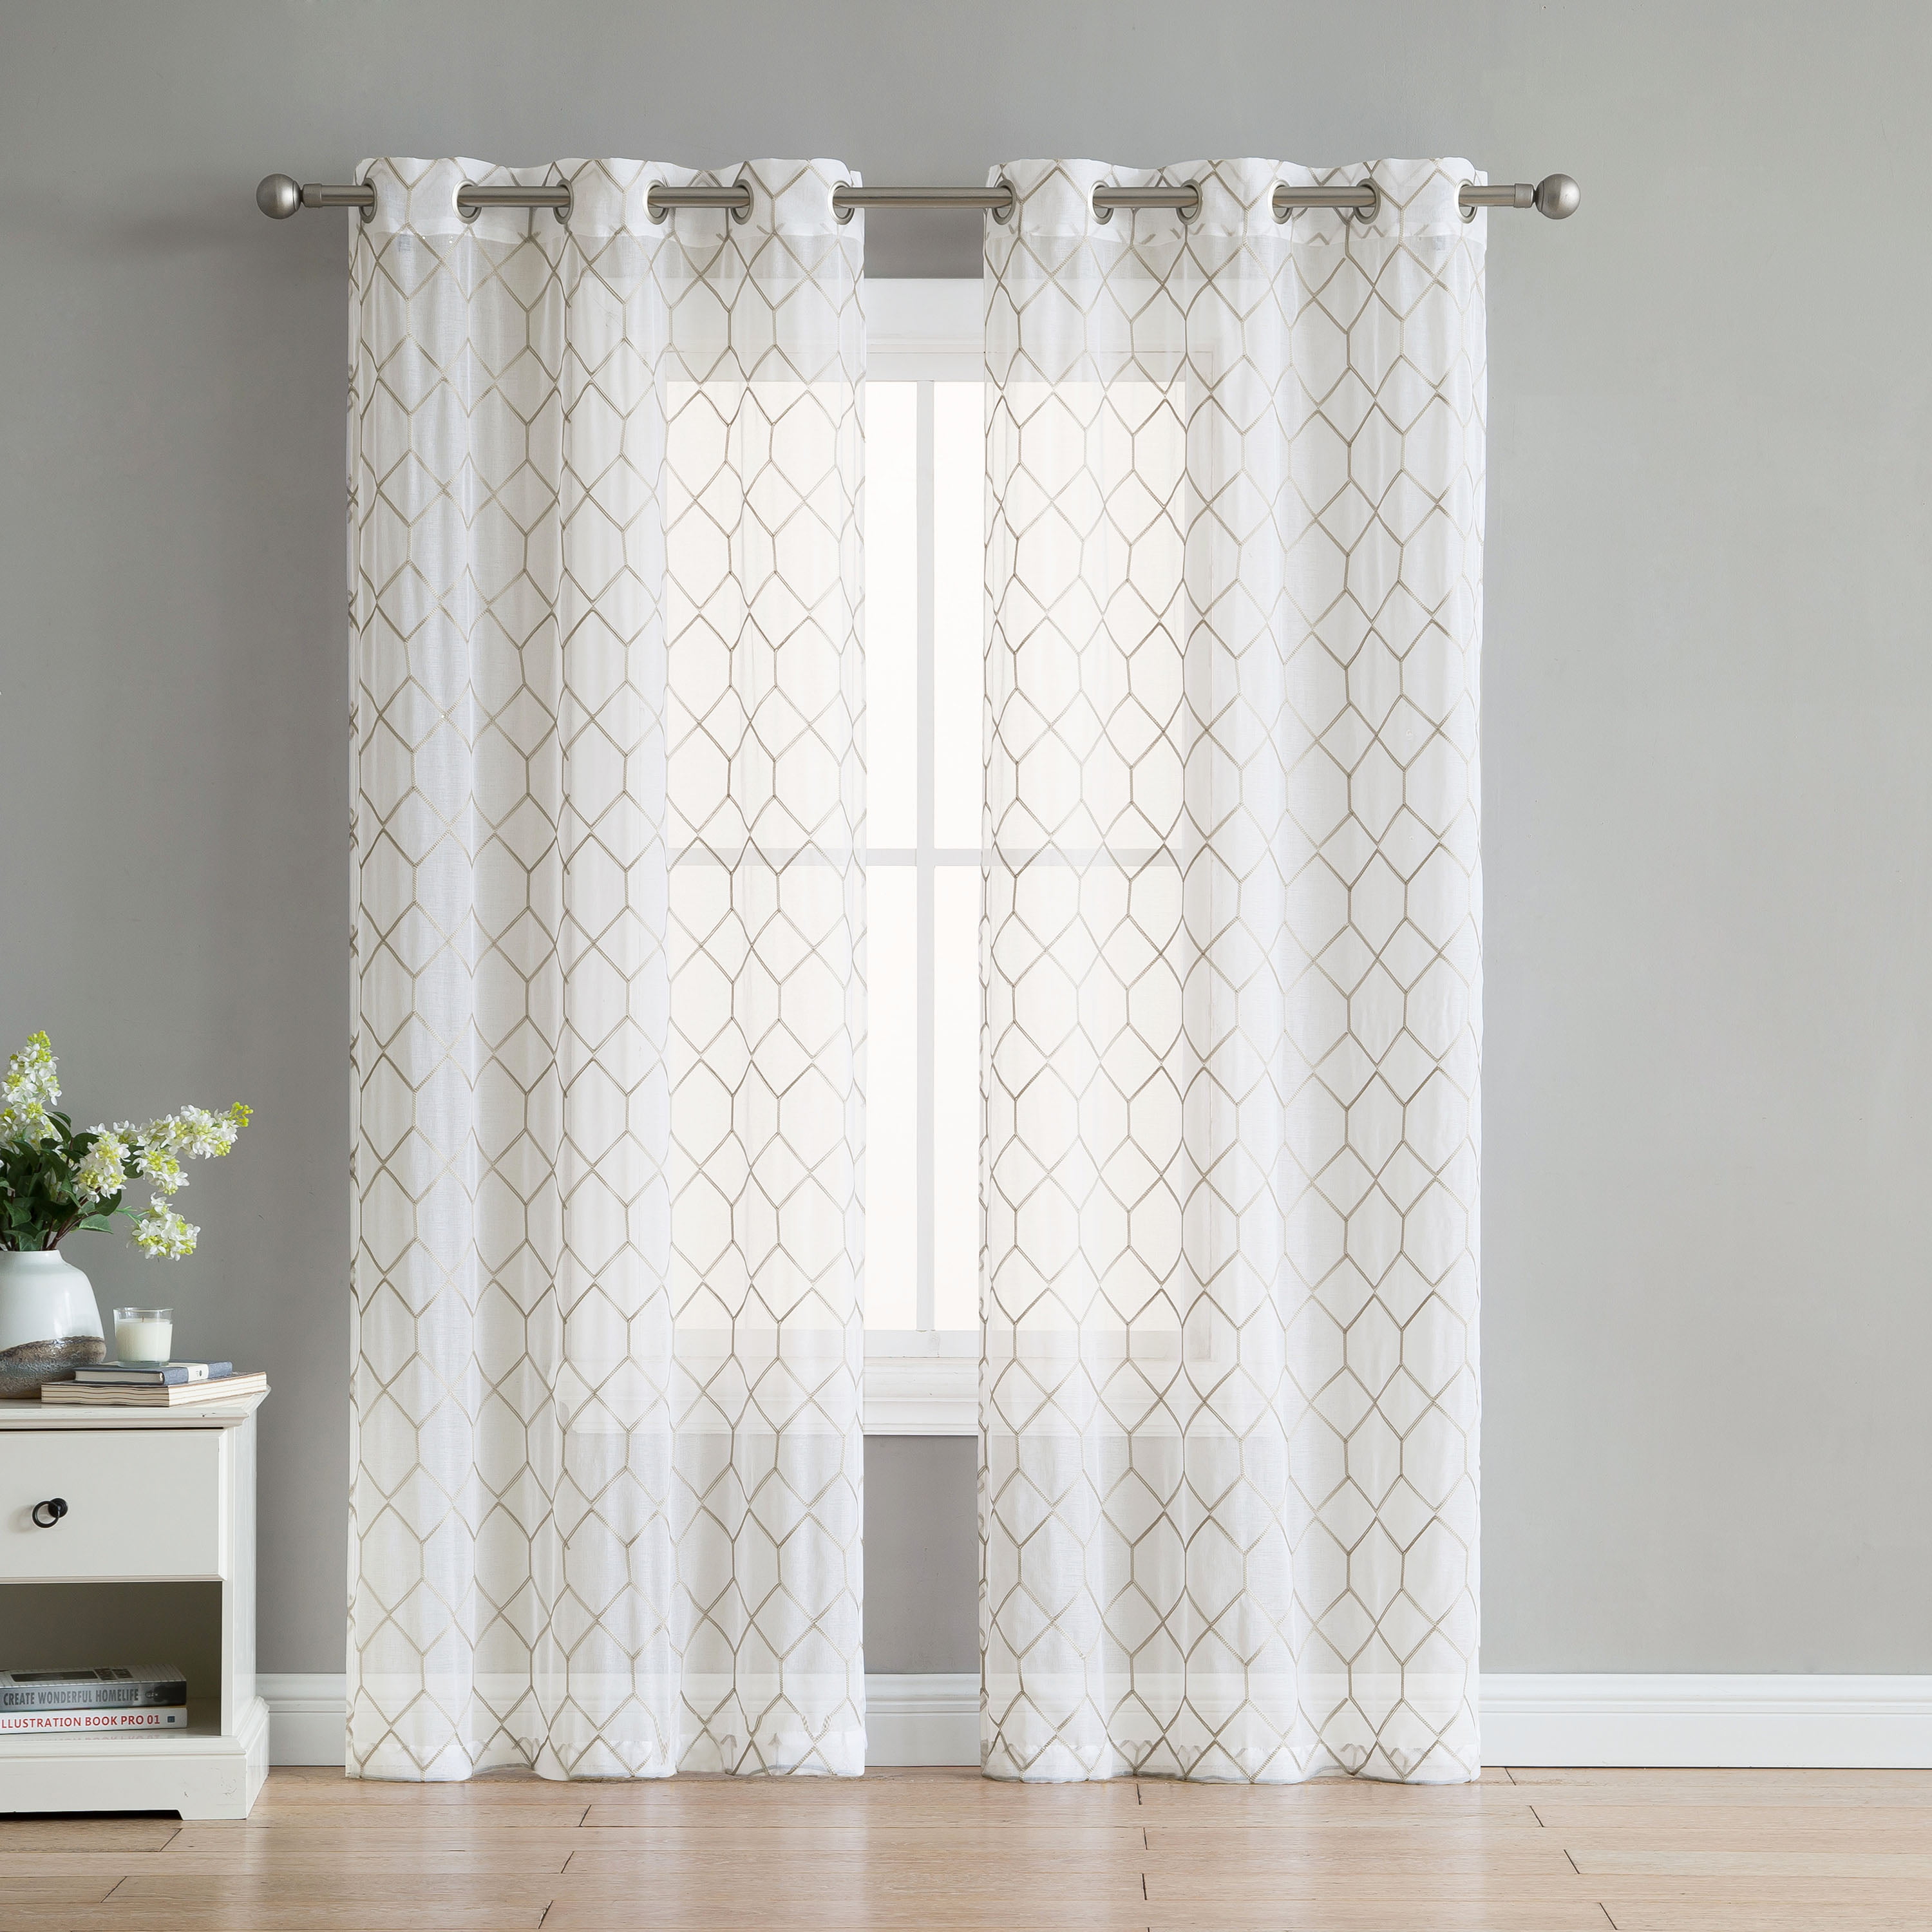 Gray Embroidered Floral Lattice Design 96" Long 2  White Sheer Window Curtains 